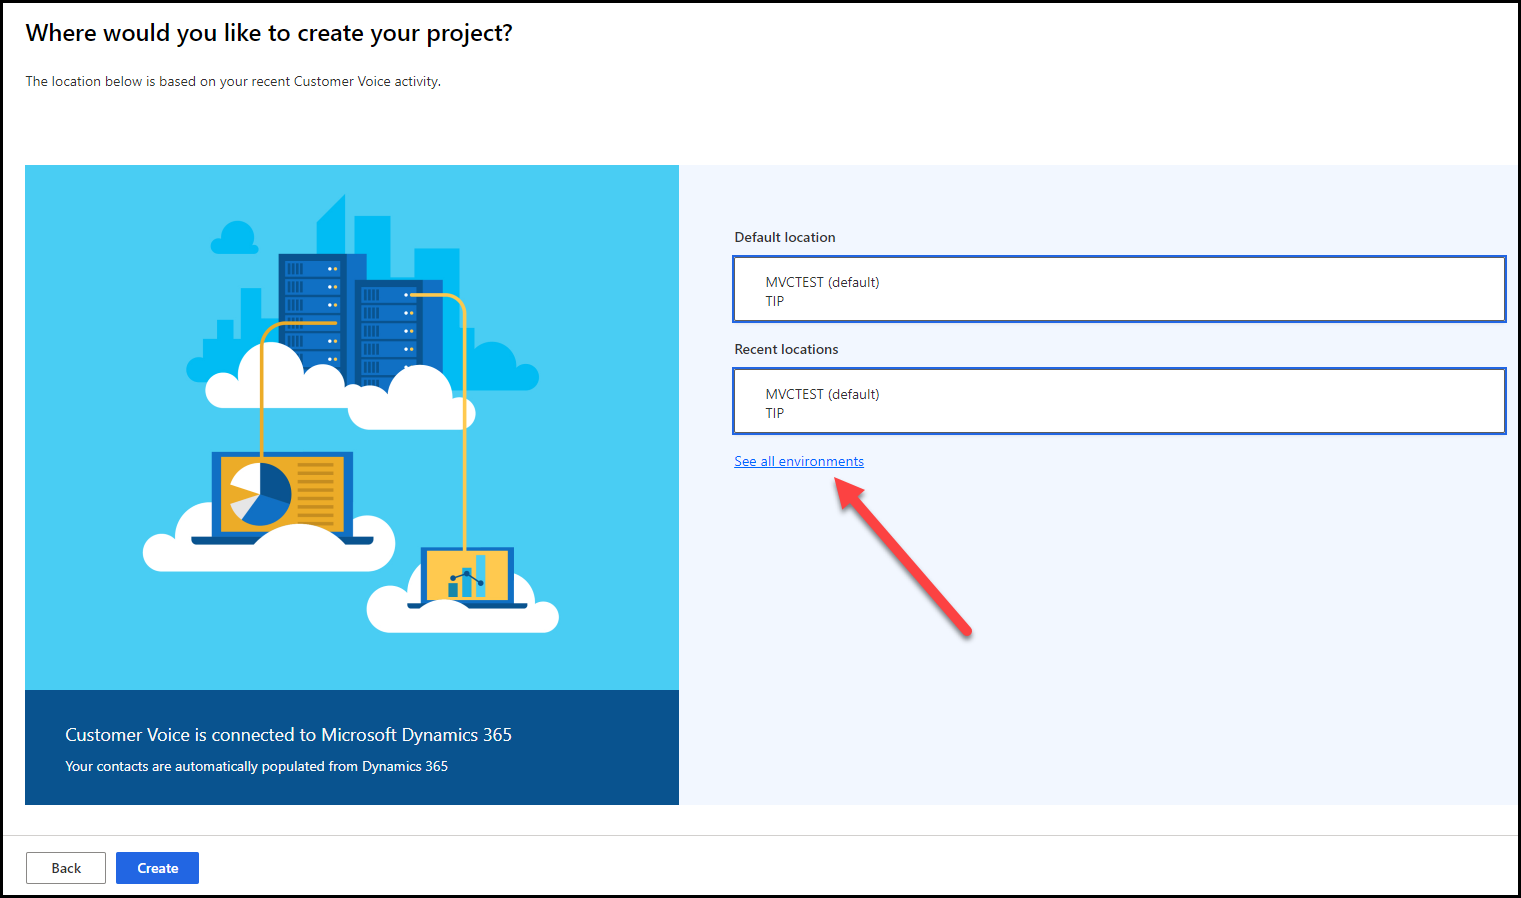 On the Where would you like to create your project screen, an arrow points to the See all environments link.